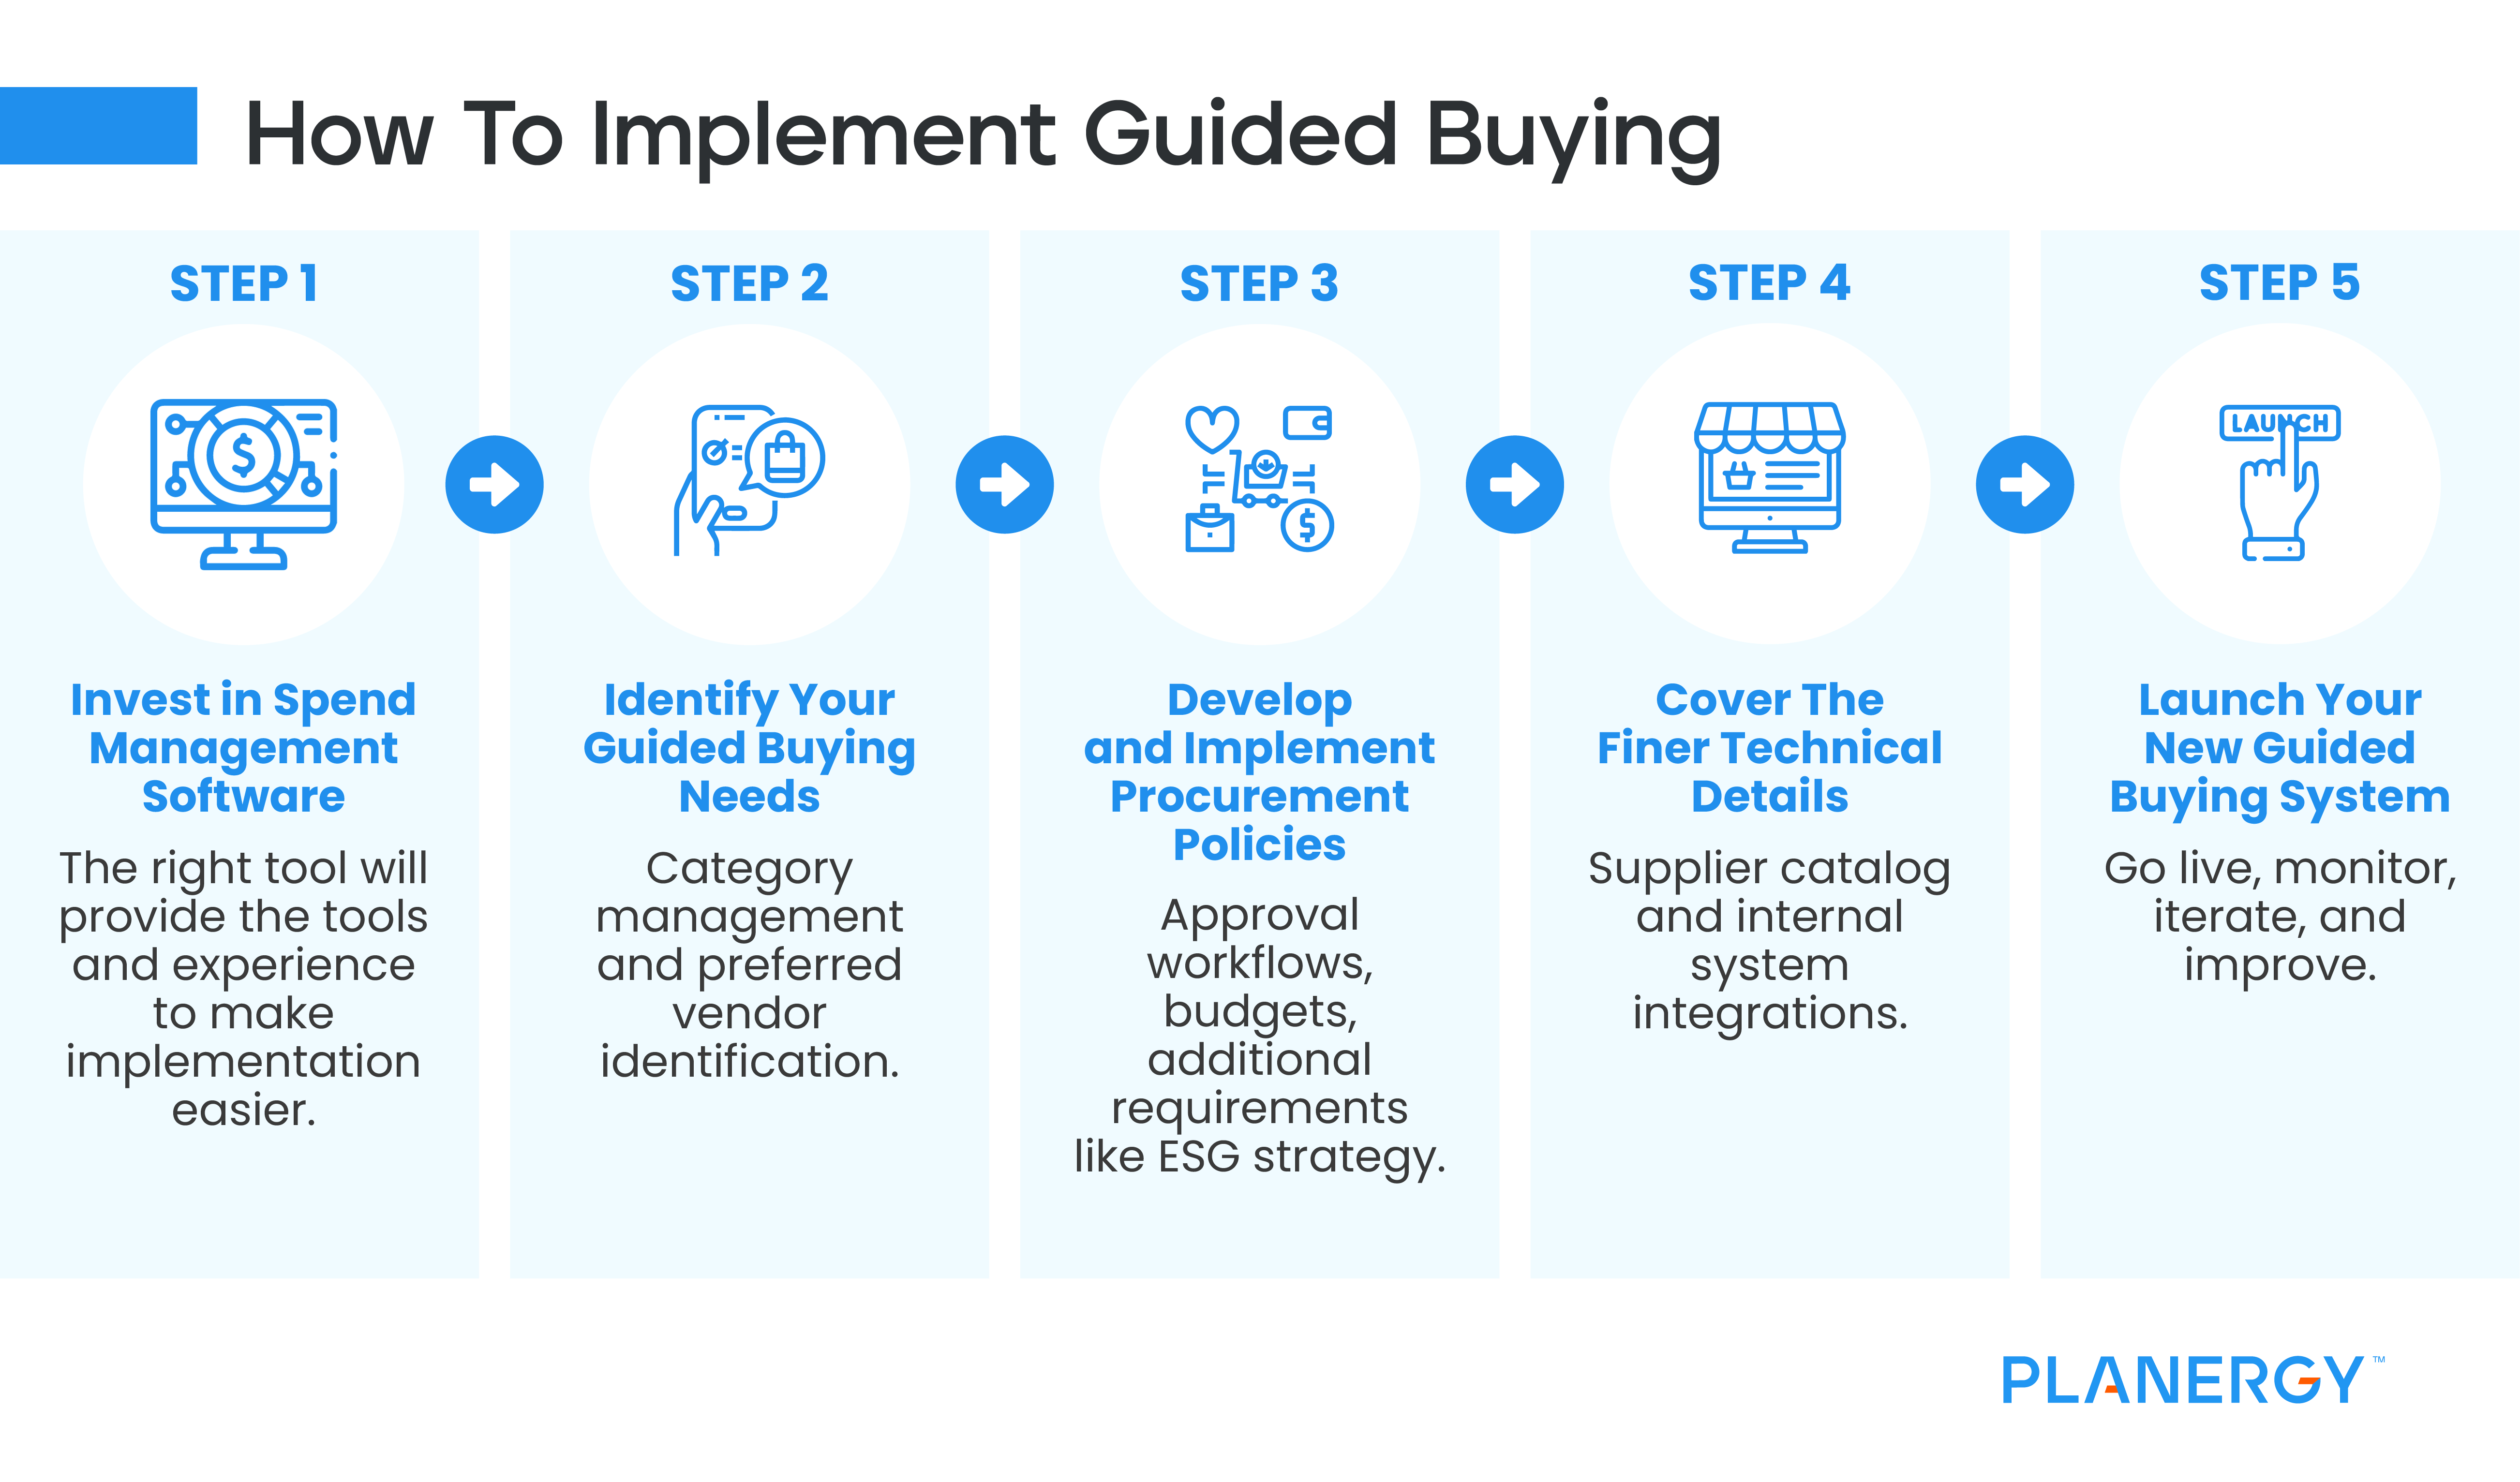 How to Implement Guided Buying